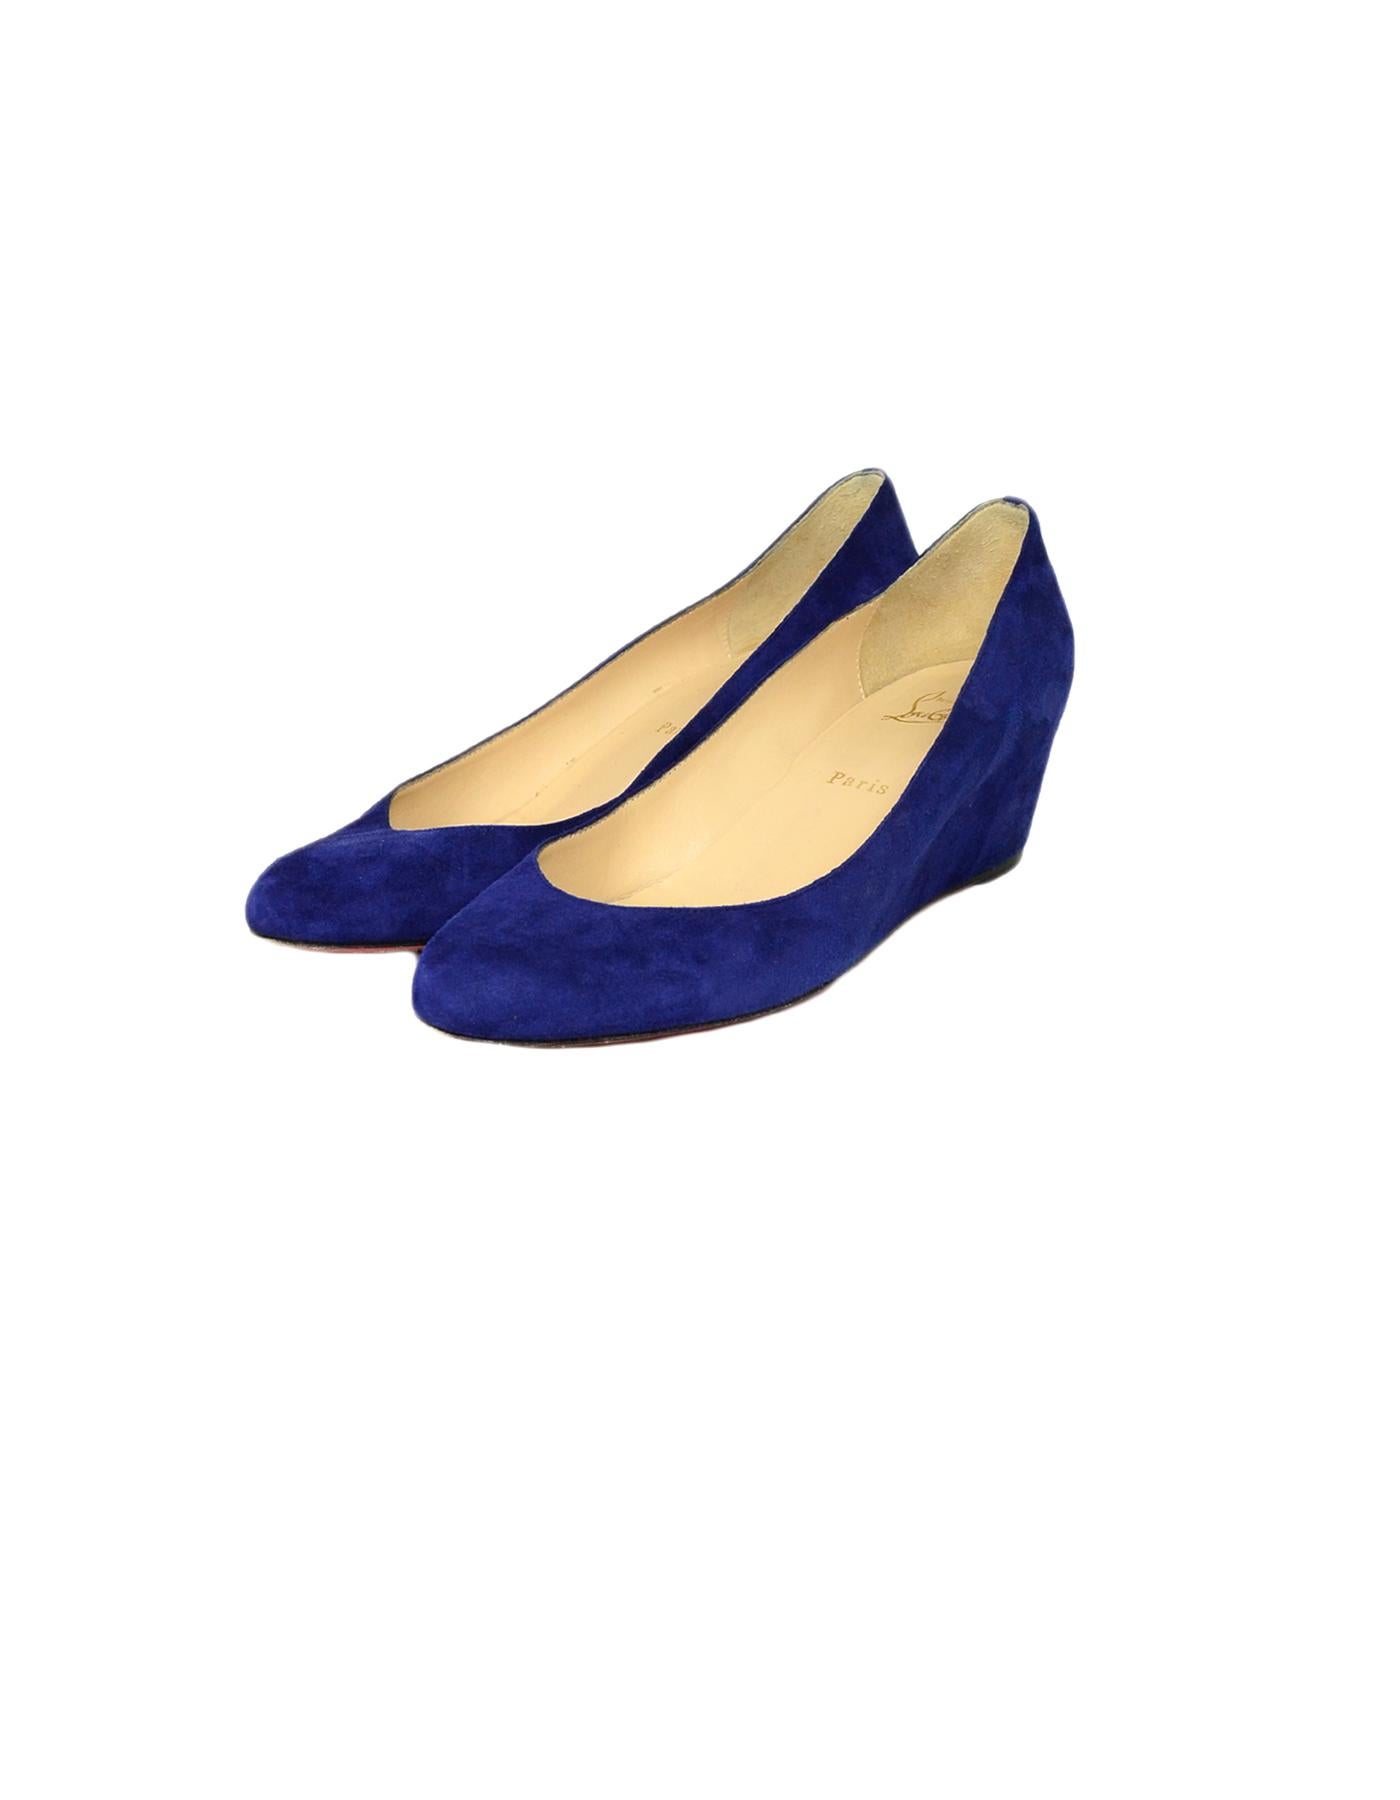 Christian Louboutin Blue Suede Covered Wedges sz 41

Made In: Italy
Color: Blue 
Materials: Suede
Closure/Opening: Slip on
Overall Condition: Very good pre-owned condition, with the exception of wear on the soles

Marked Size: 41
Heel Height: